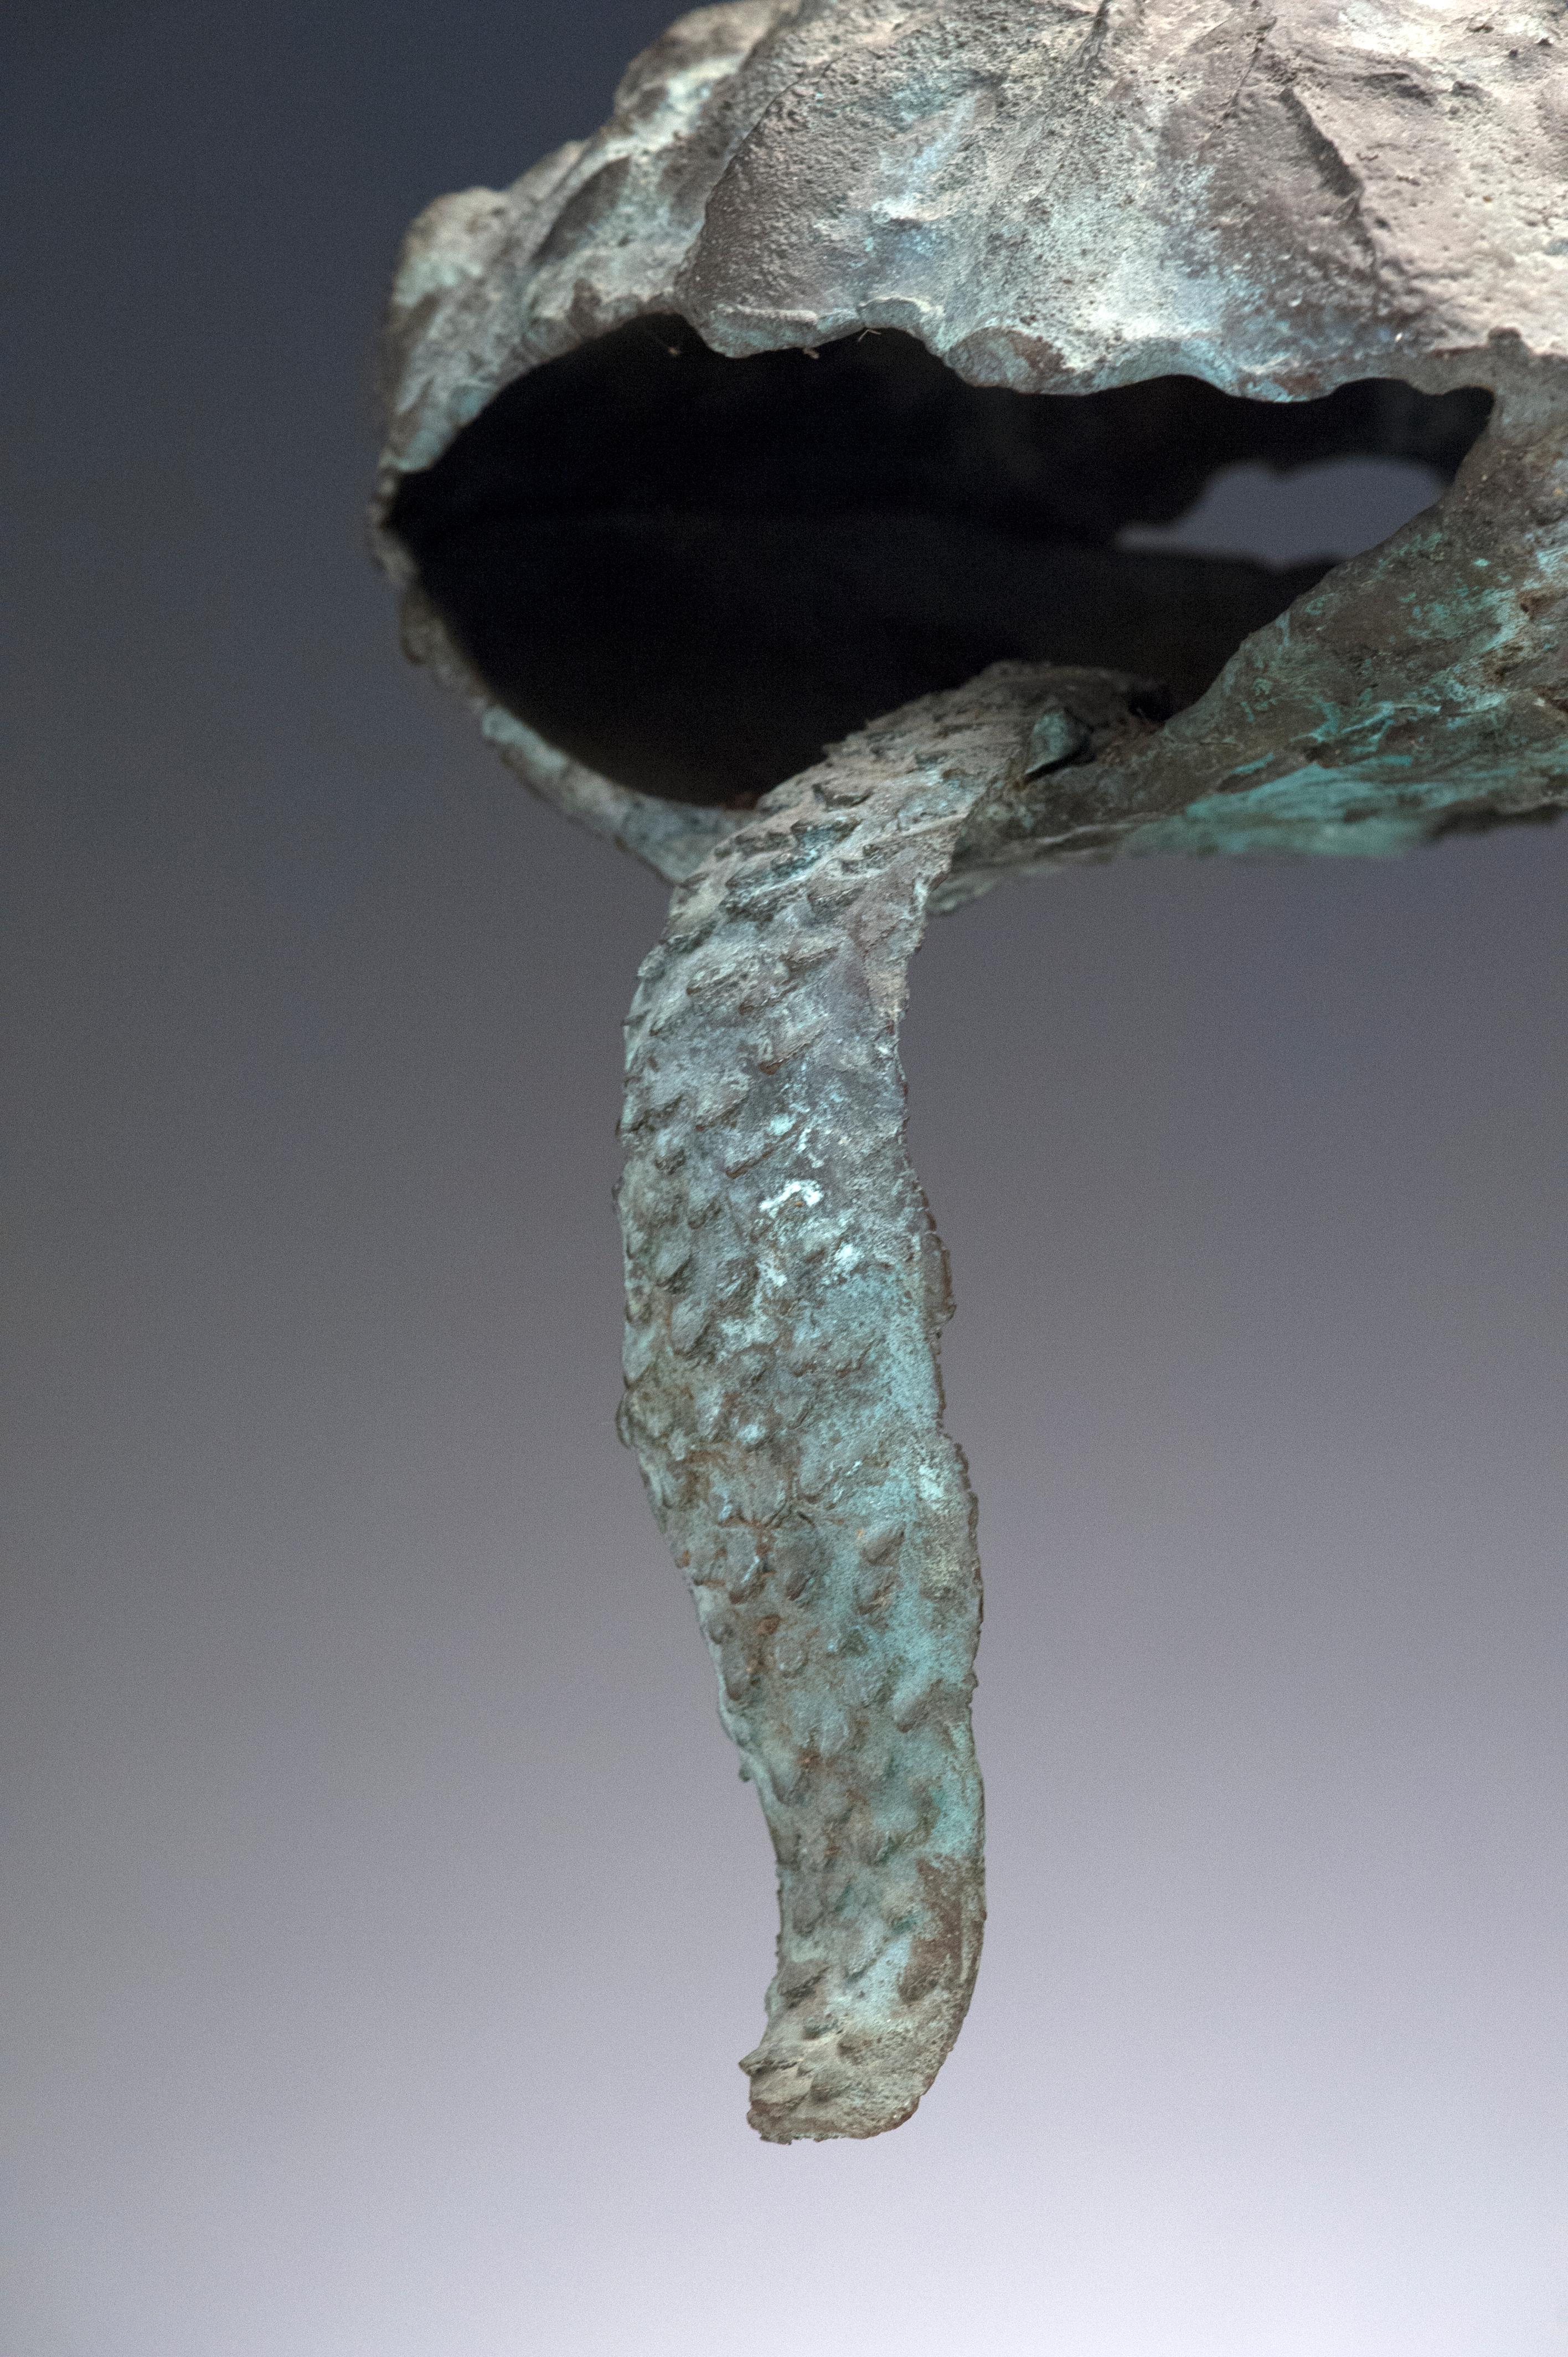 Appealing bronze organic sculpture by Latin American sculptor Raúl Valdivieso (Chilean, 1931-1993). Valdivieso is known for his reinterpretation of the classic organic forms and human figures. Sculpture has developed a beautiful patina and retains